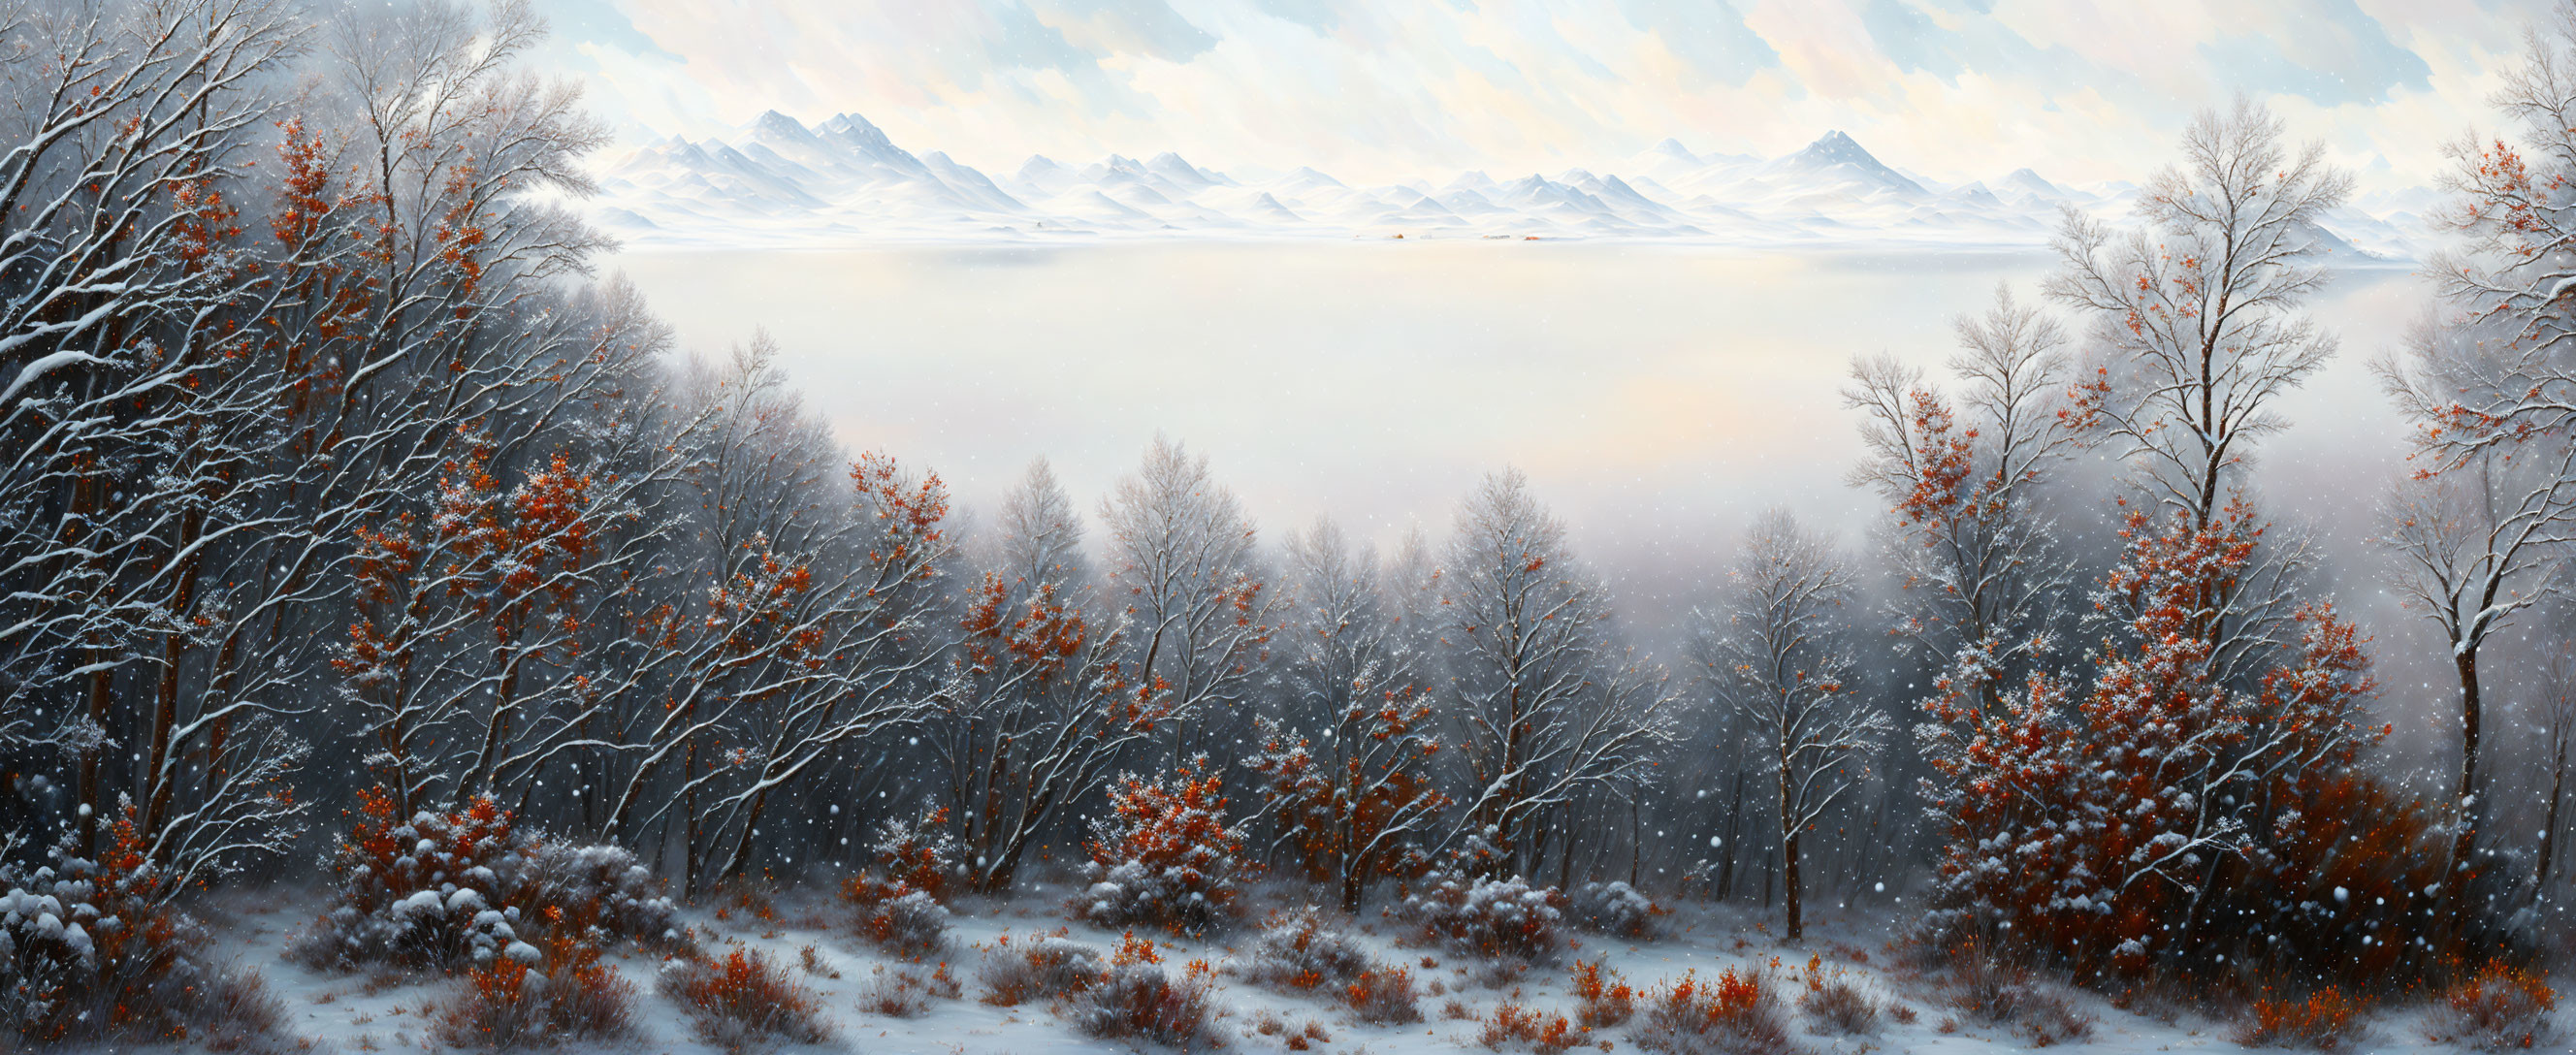 Snow-covered trees in misty winter landscape with distant mountains under cloudy sky